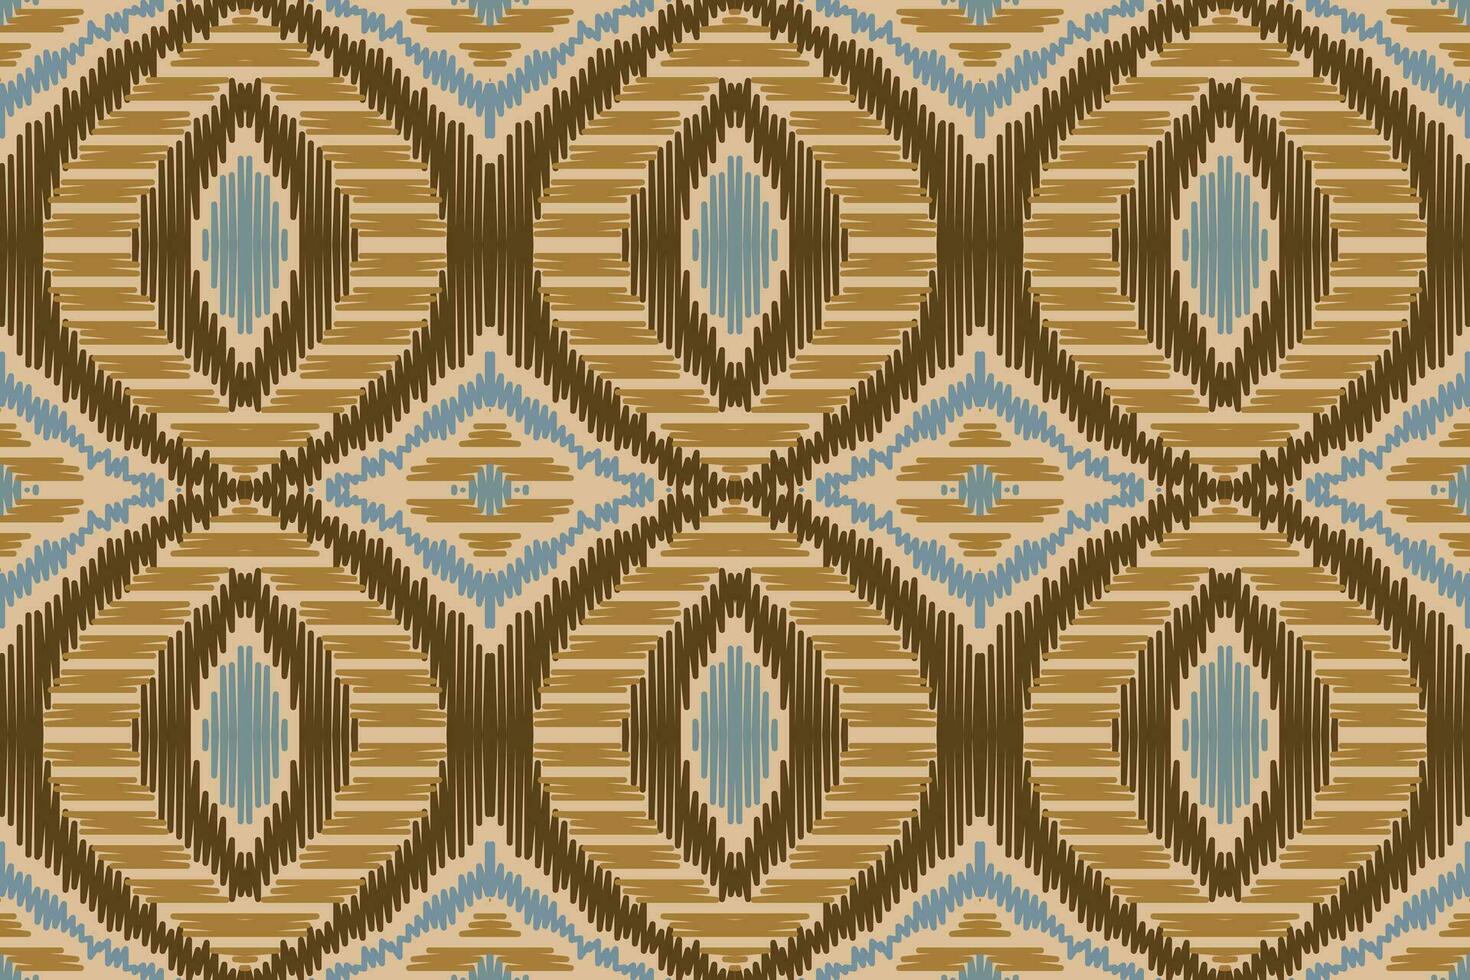 Ikat Damask Paisley Embroidery Background. Ikat Background Geometric Ethnic Oriental Pattern Traditional. Ikat Aztec Style Abstract Design for Print Texture,fabric,saree,sari,carpet. vector